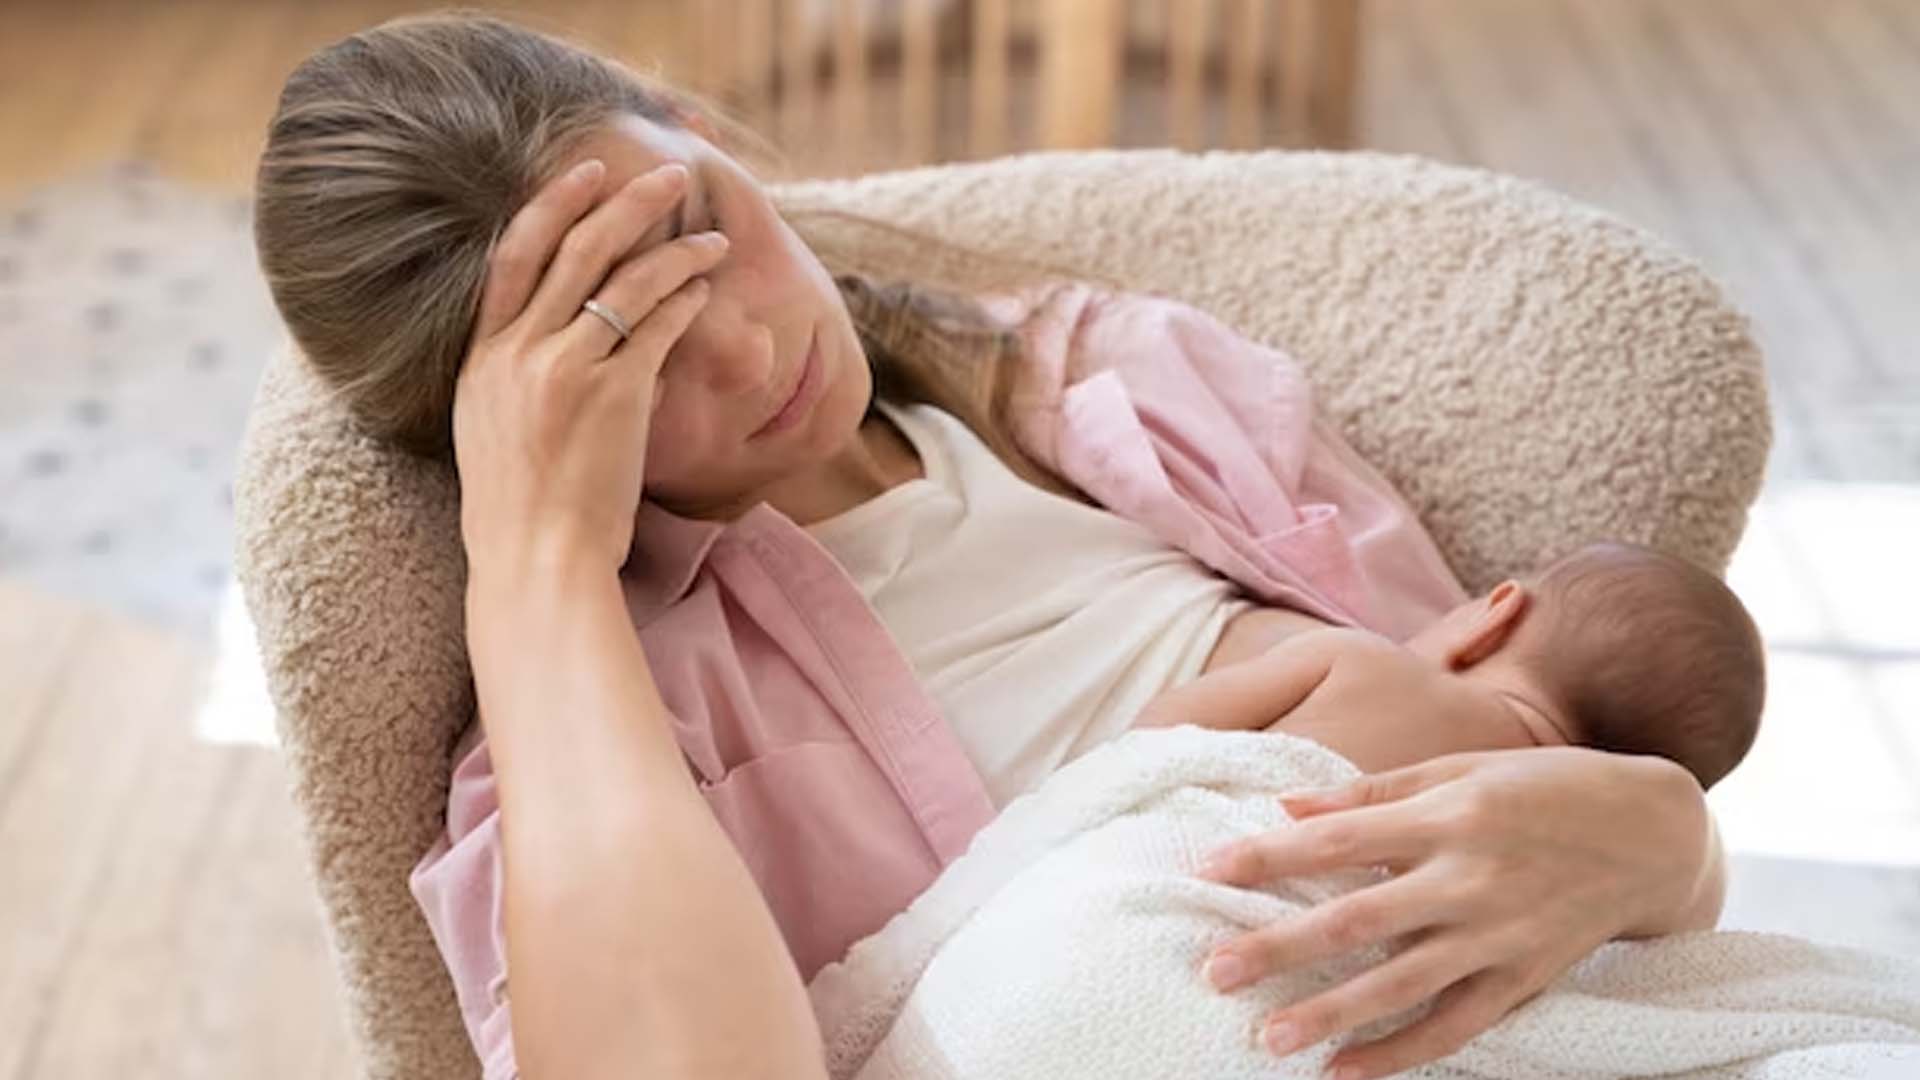 What are the Home Remedies for Breast Pain after stopping Breastfeeding?